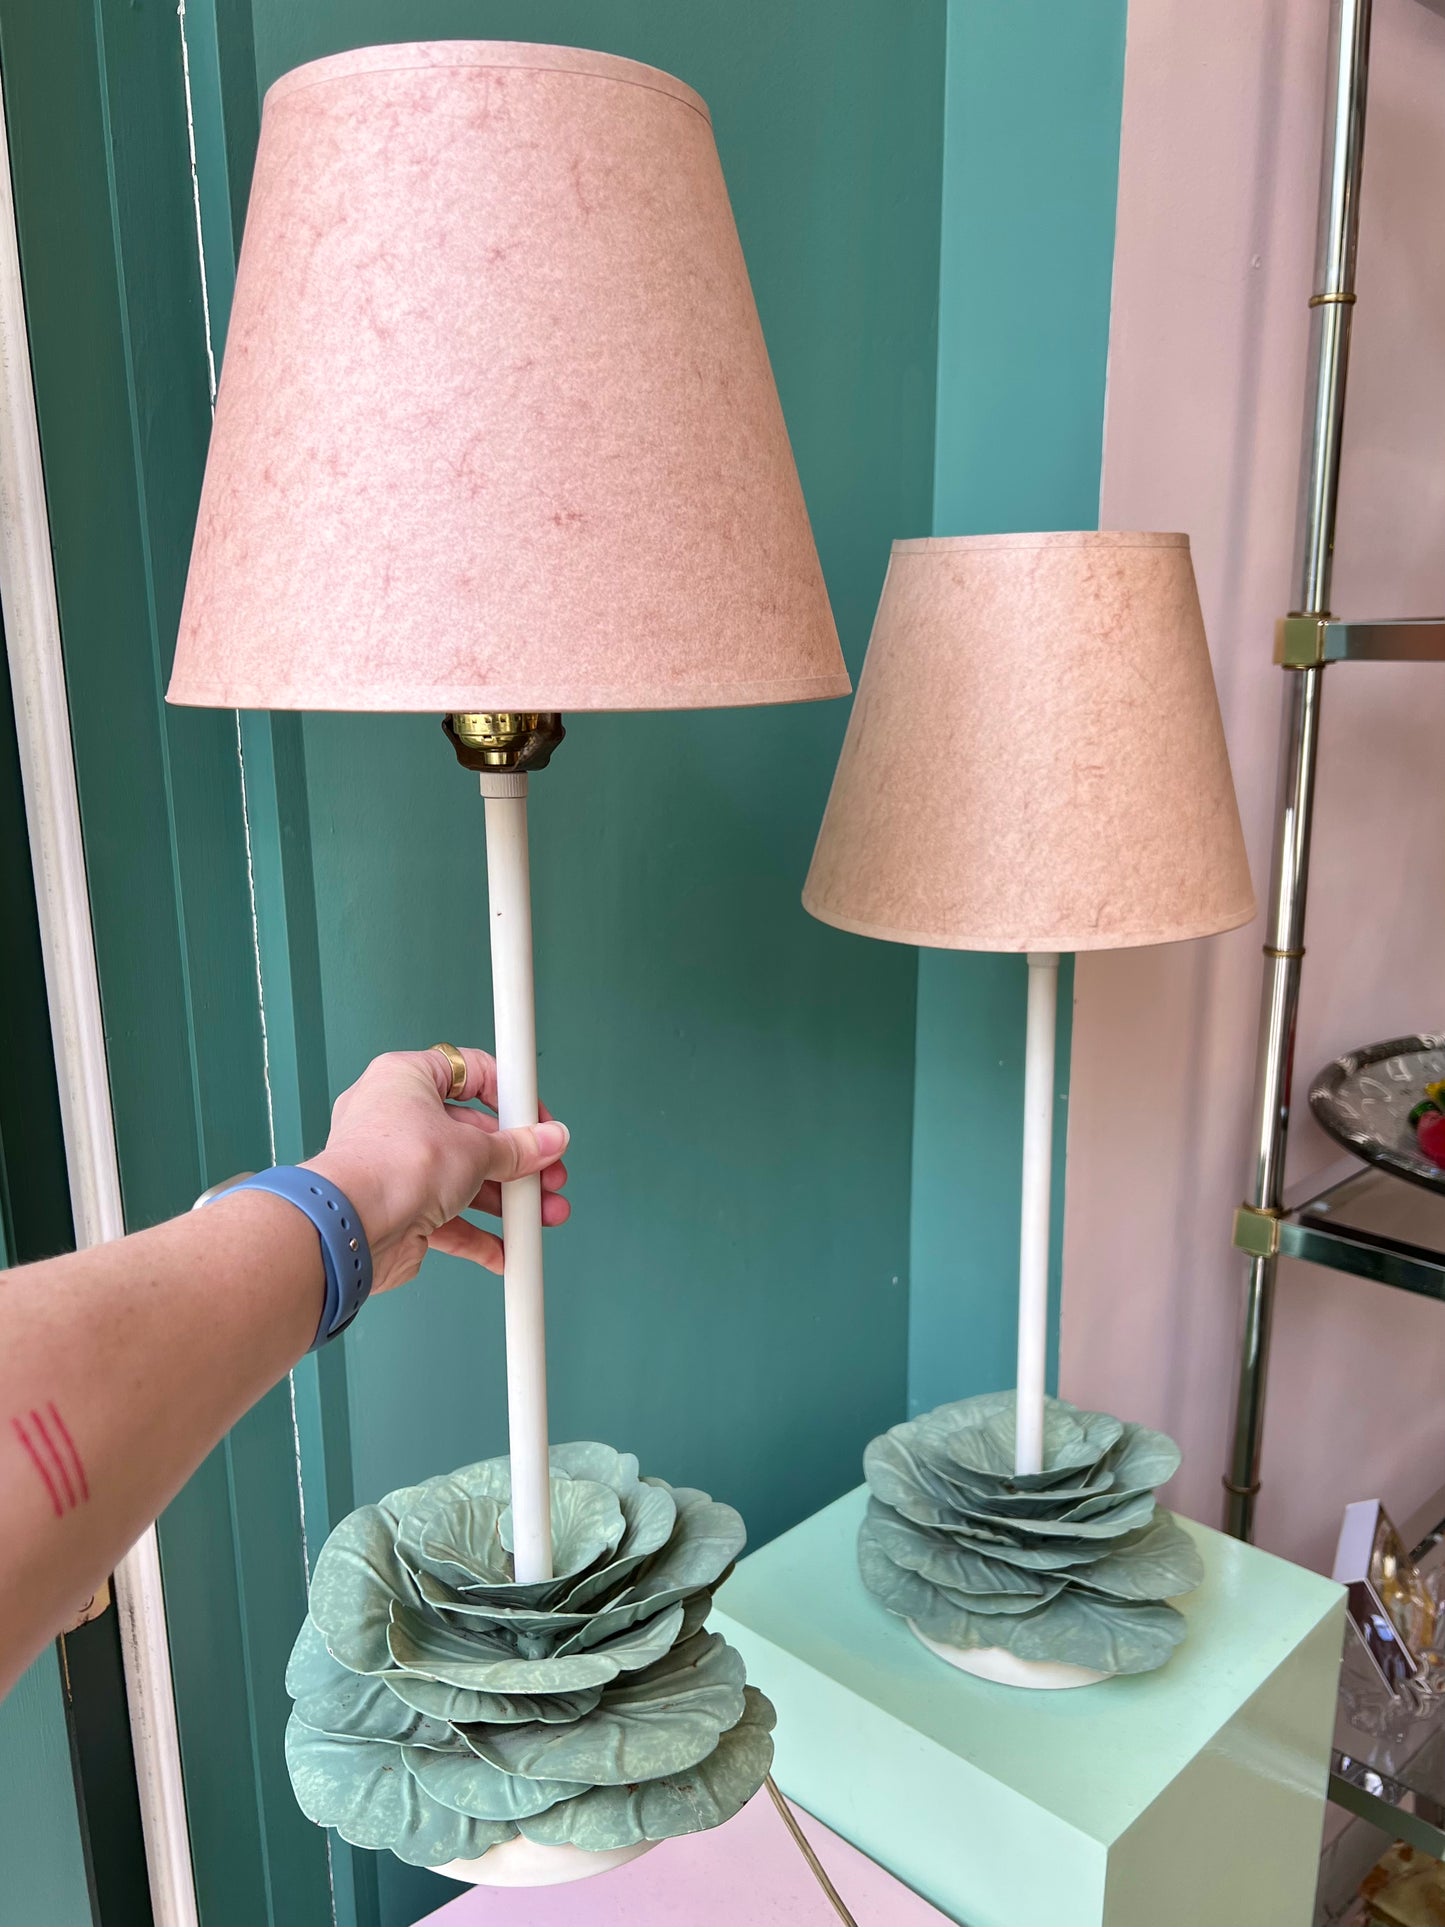 Pair of Vintage Metal Cabbage Lamps with Blush Shades